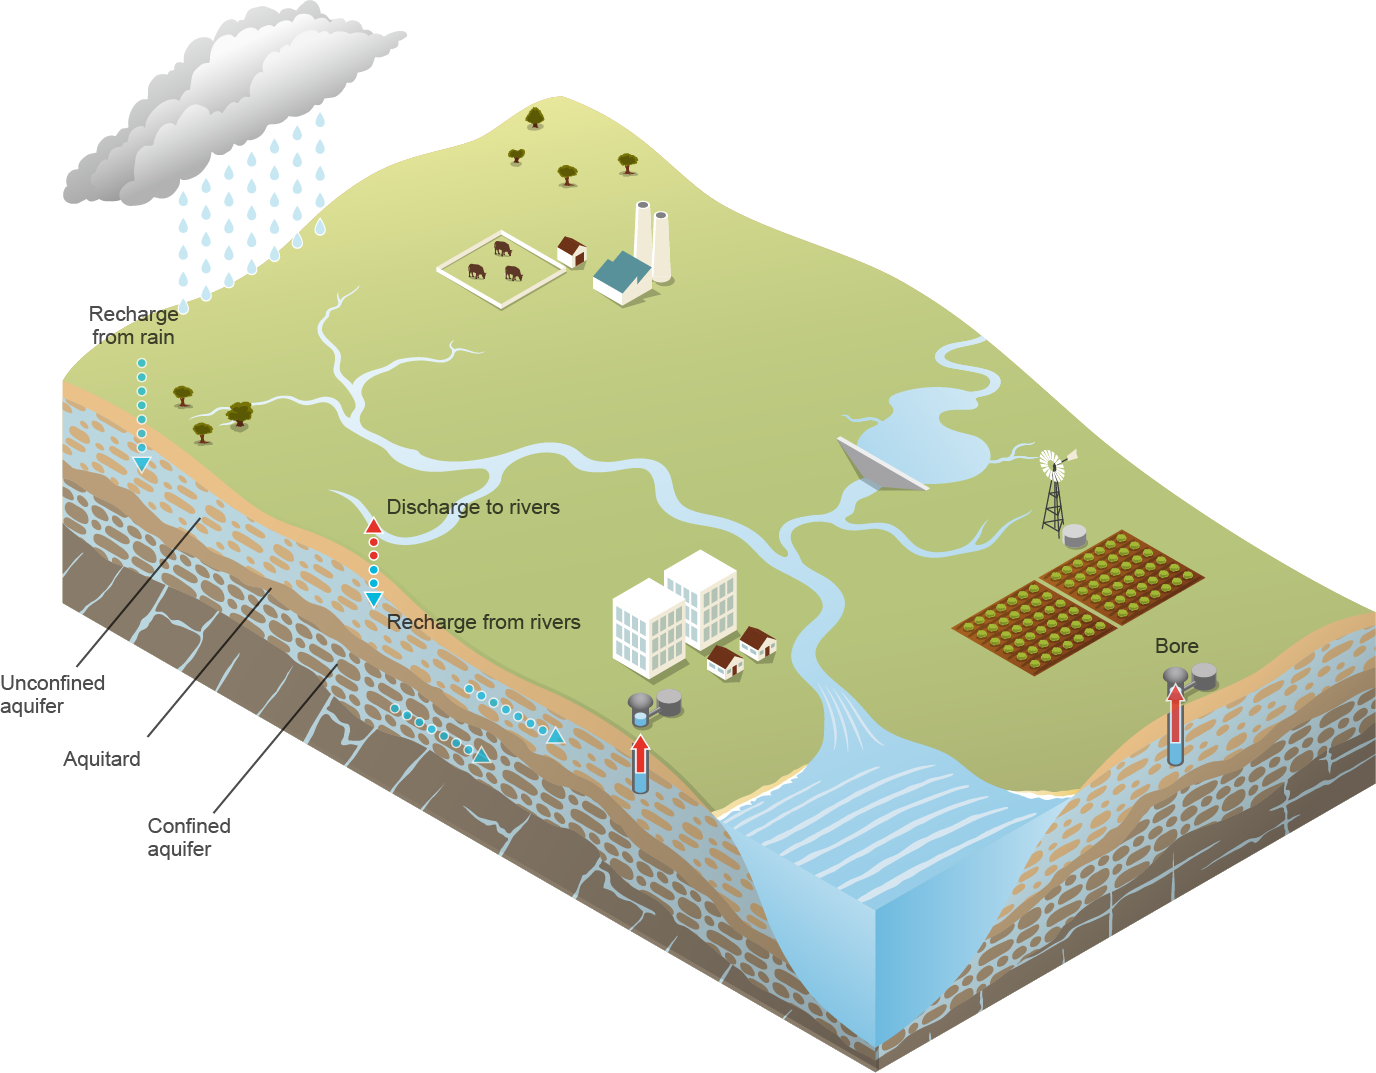 Simplified diagram of a groundwater aquifer system and its relationship with the surface